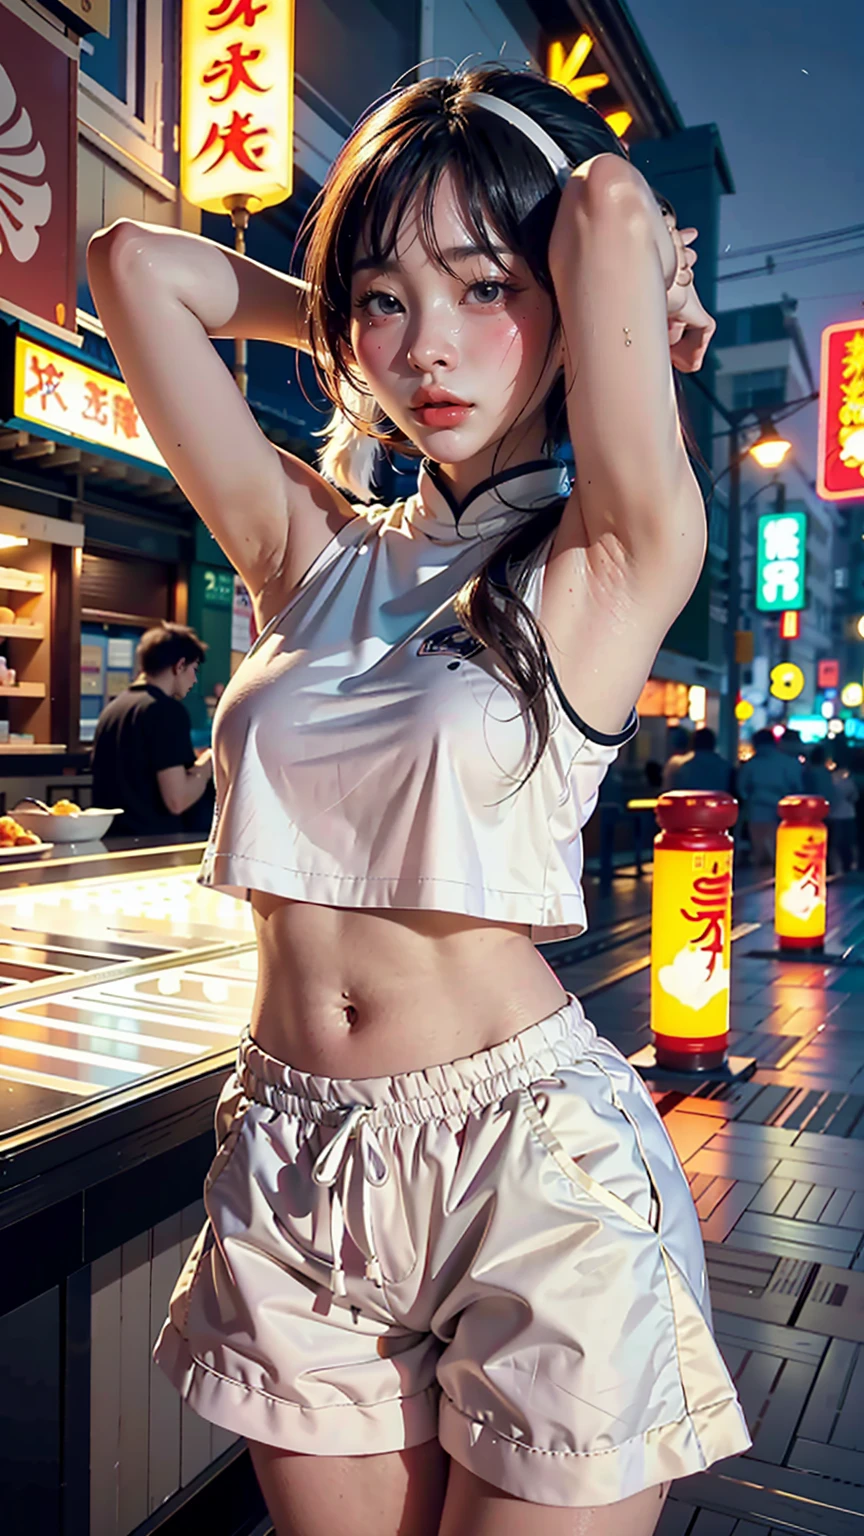 1 Girl, Beautiful, Baby Face, 20 Years Old, White Skin, Colossal Breasts, Sexy Pose, arms up, sweet armpits, Pastel Colour Anime Outfit Coatumes, ((Pastel Colout Outfit)), ((Grey Eye)), Muscles, Bokeh, Chinese Street Background, Masterpiece, ((Night))